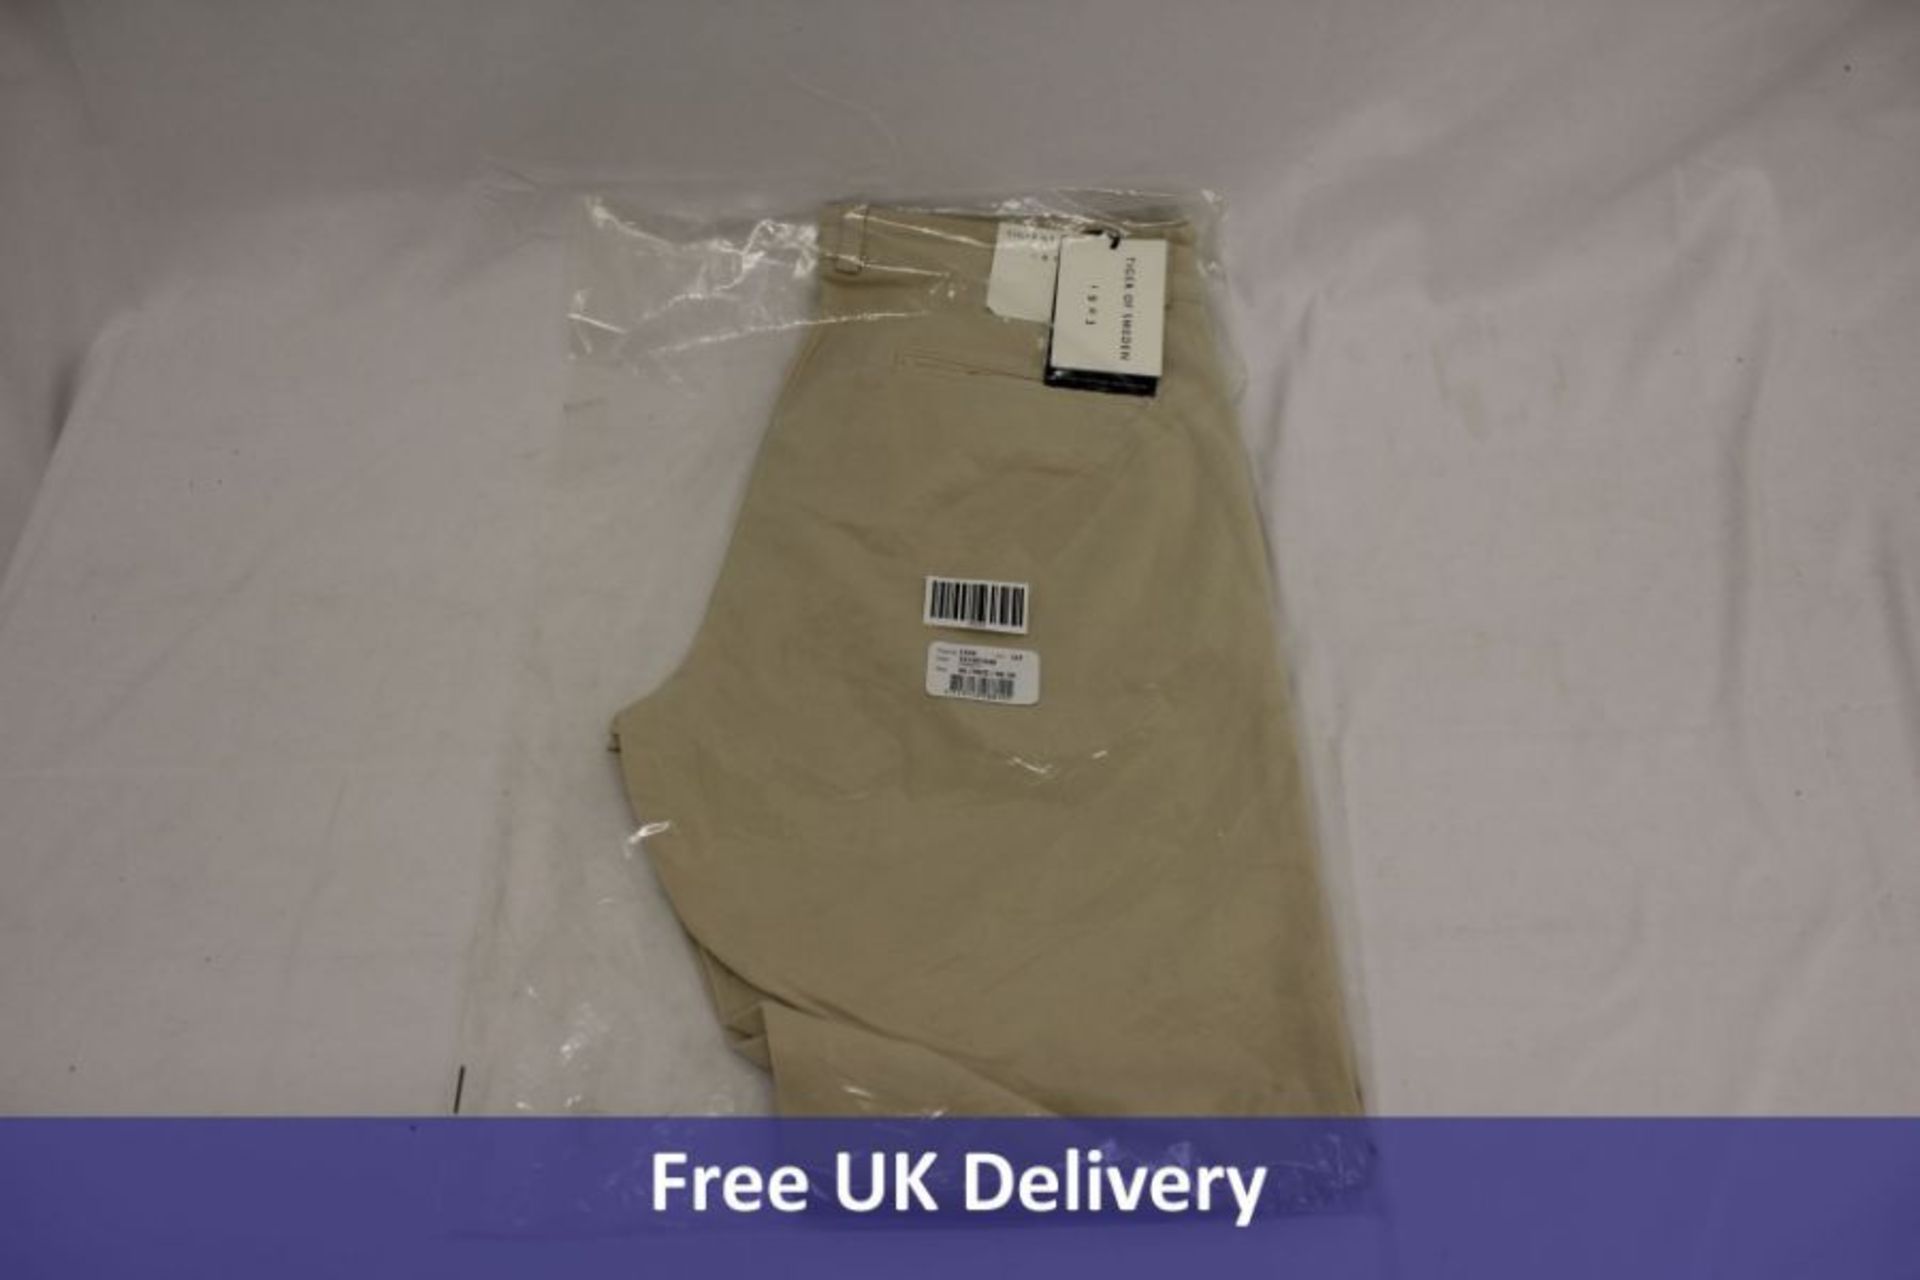 Two Tiger of Sweden Transit 4 Trousers, Sand, 1x Size 54 and 1x Size 56 - Image 2 of 2